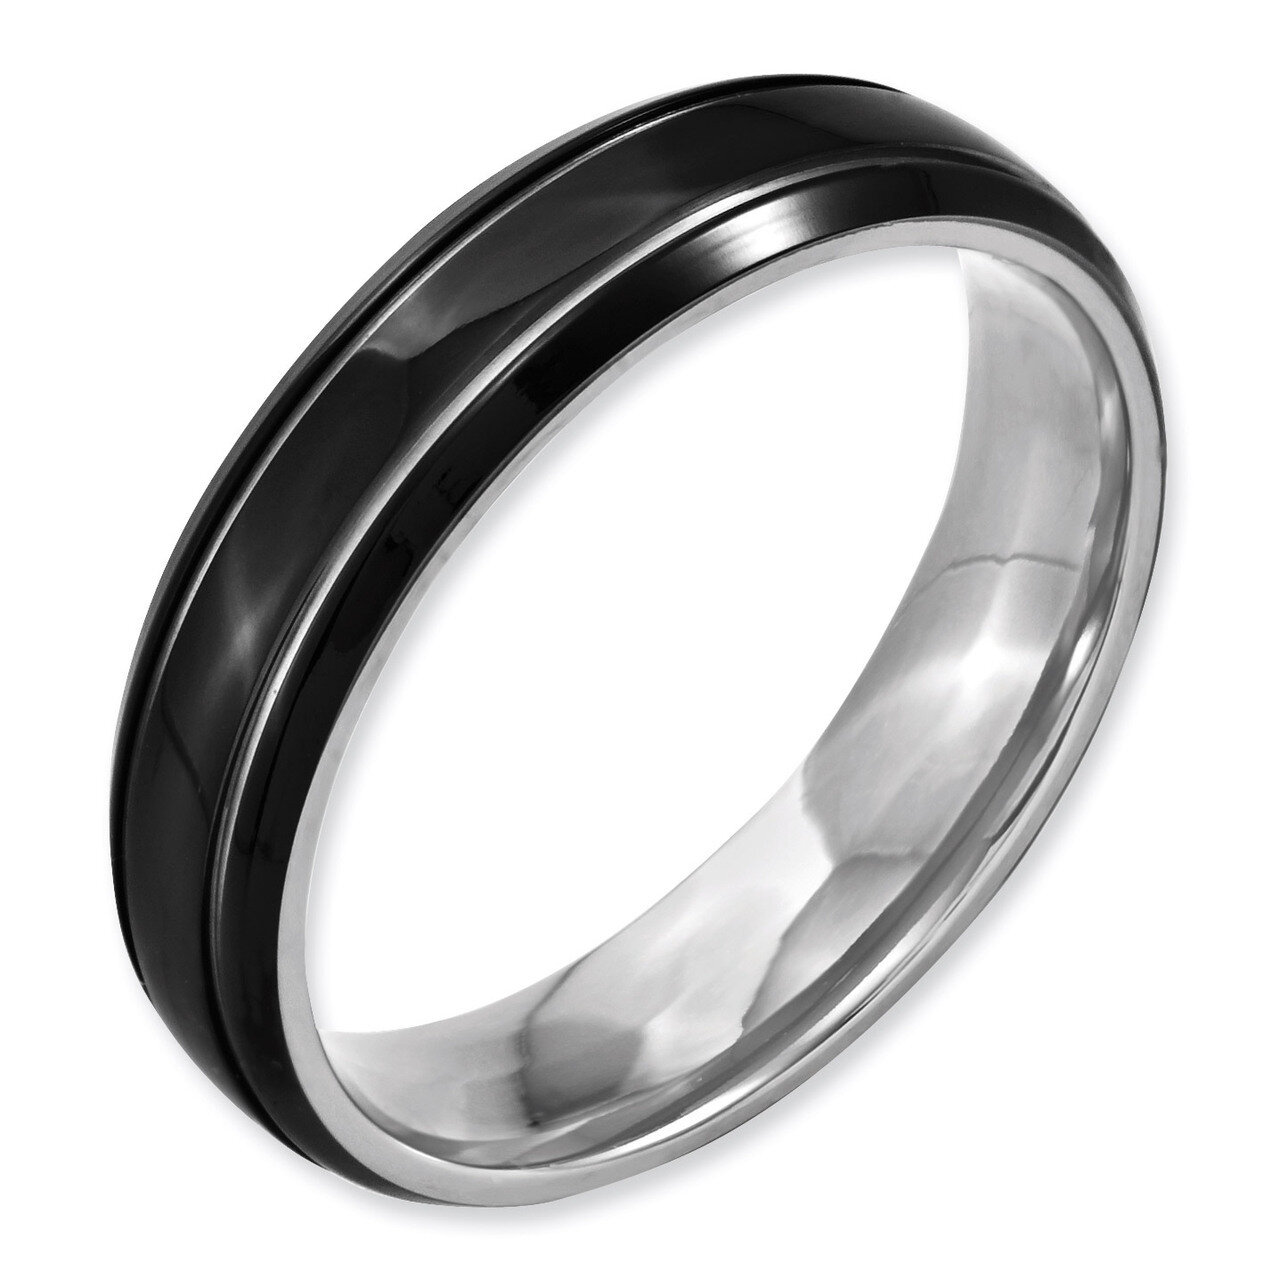 Grooved & Polished 6mm Black IP-plated Band - Stainless Steel SR148